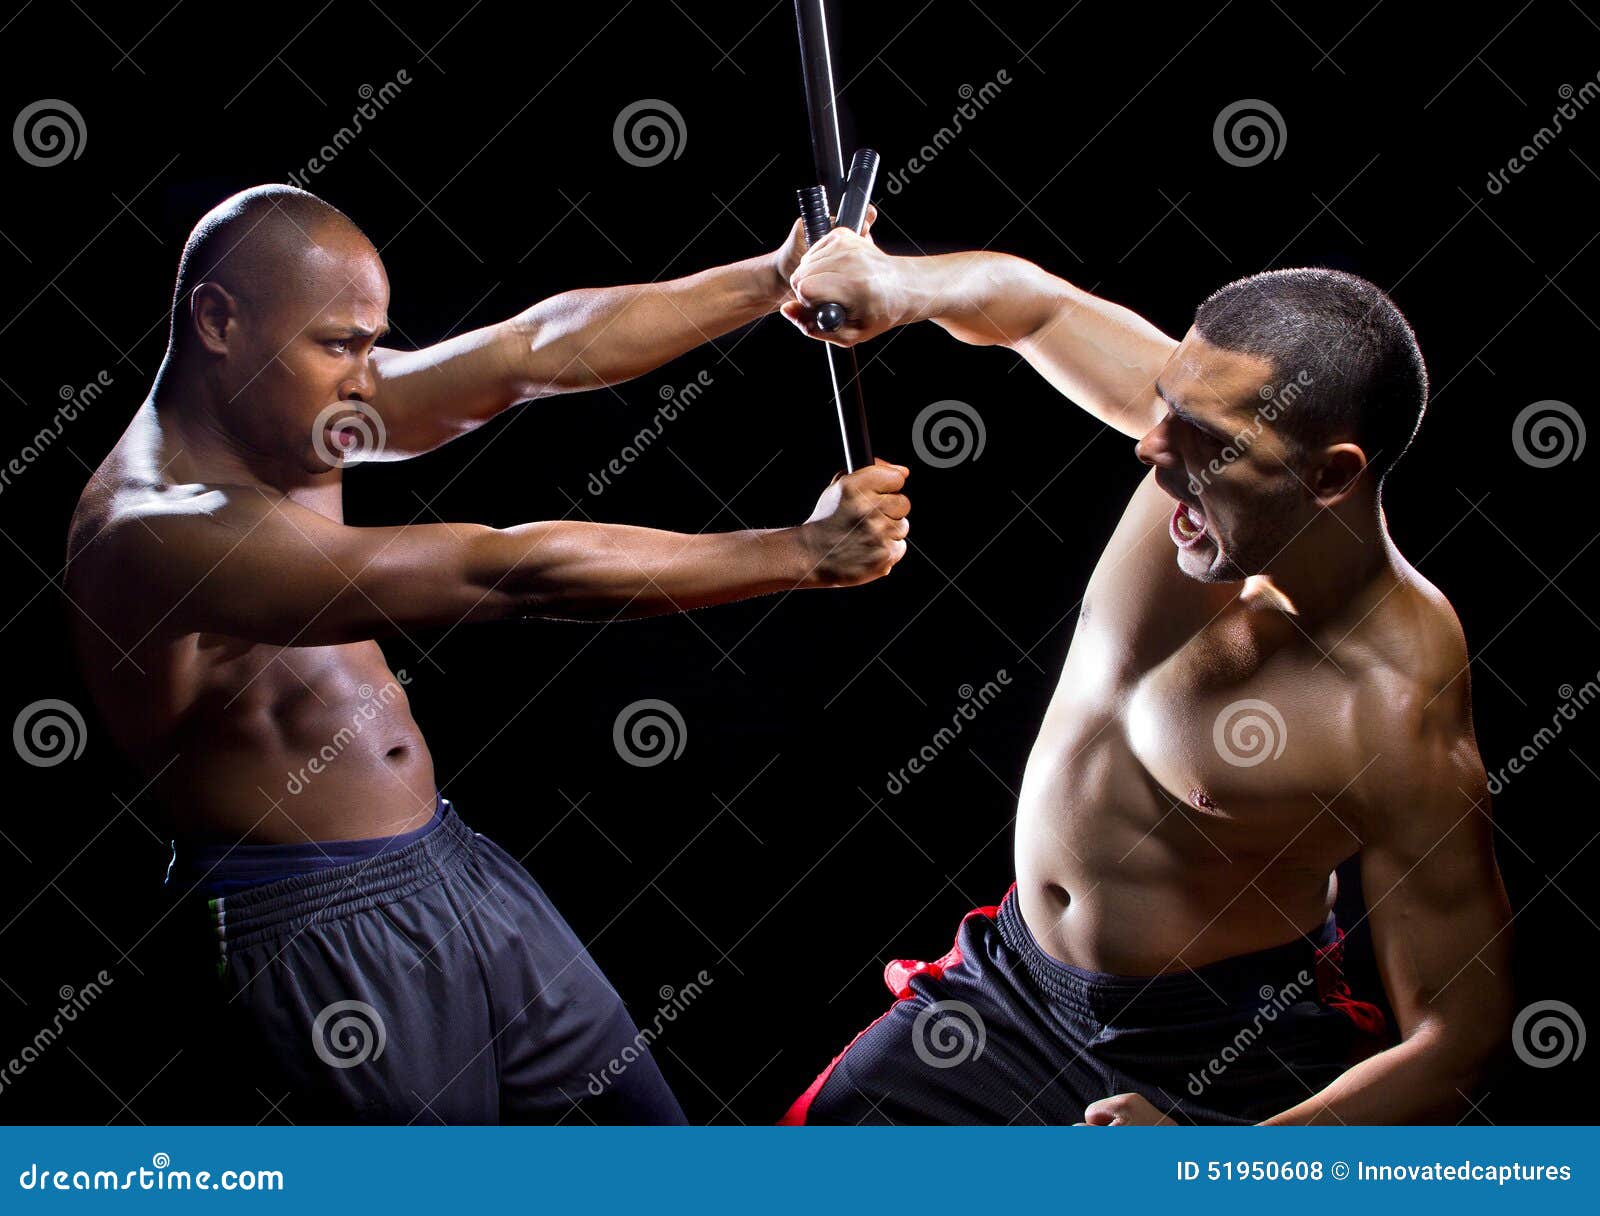 Kali Escrima Fighters Sparring Stock Photo - Image of arnis, bout: 51950608